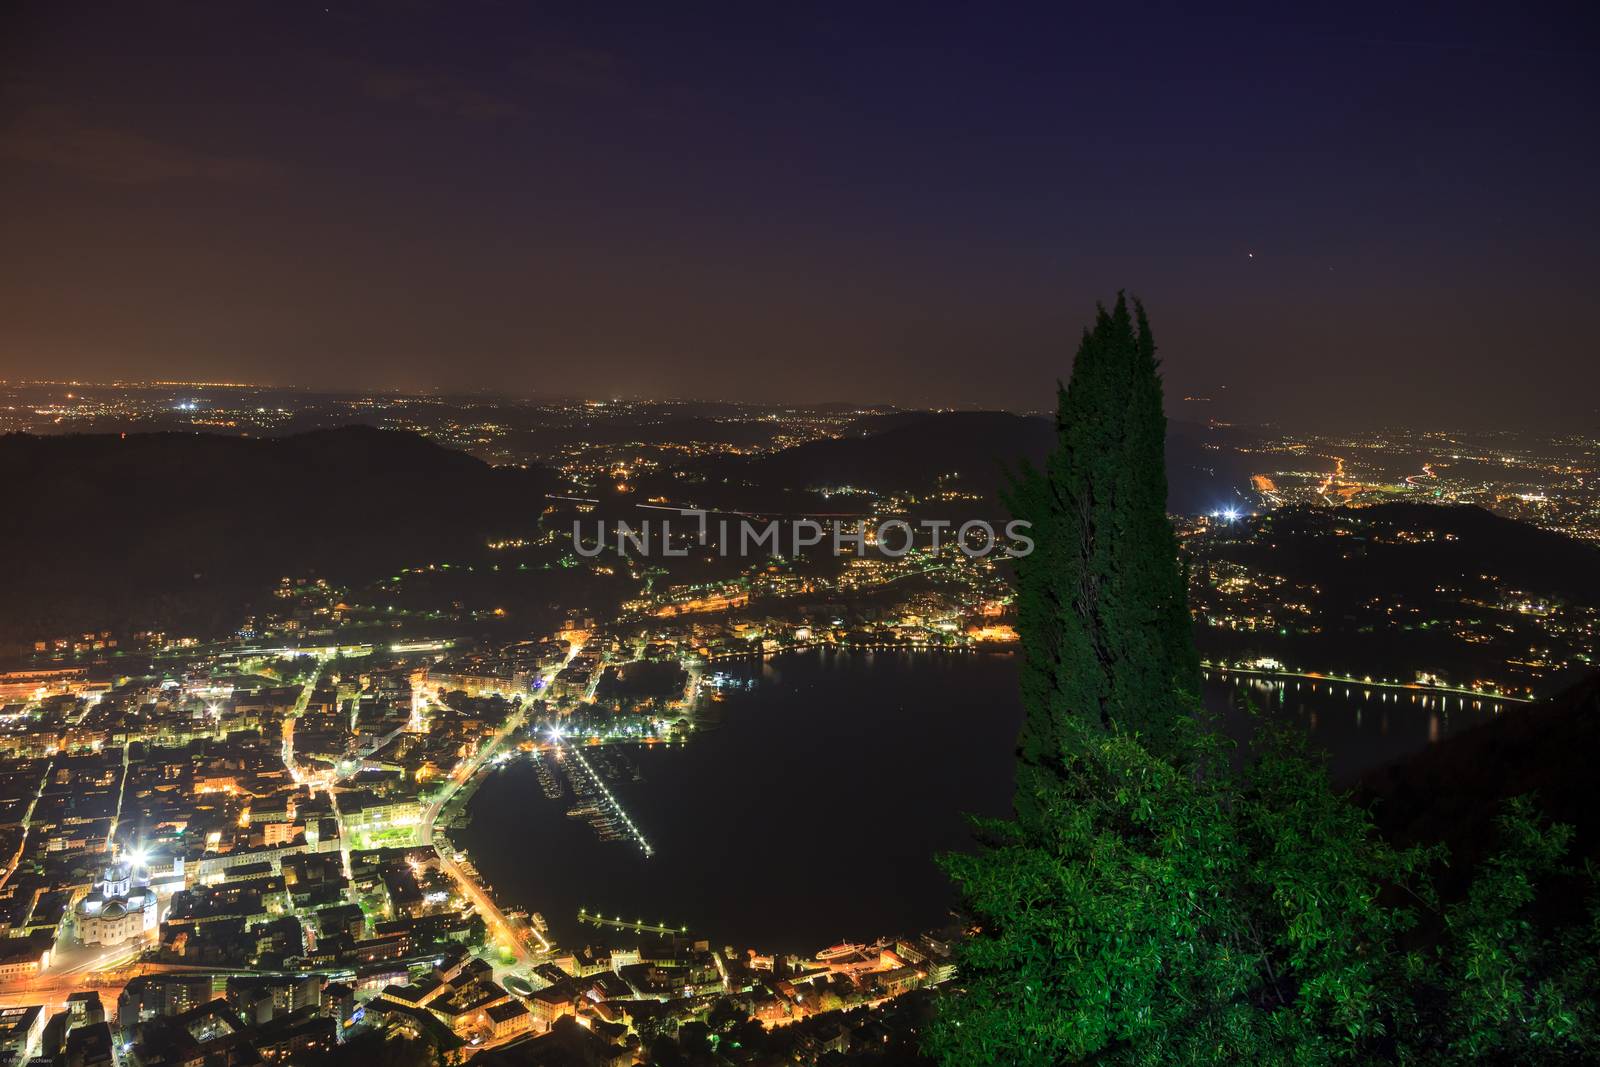 A nocturnal aerial view of Como and its lake from Brunate, Italy